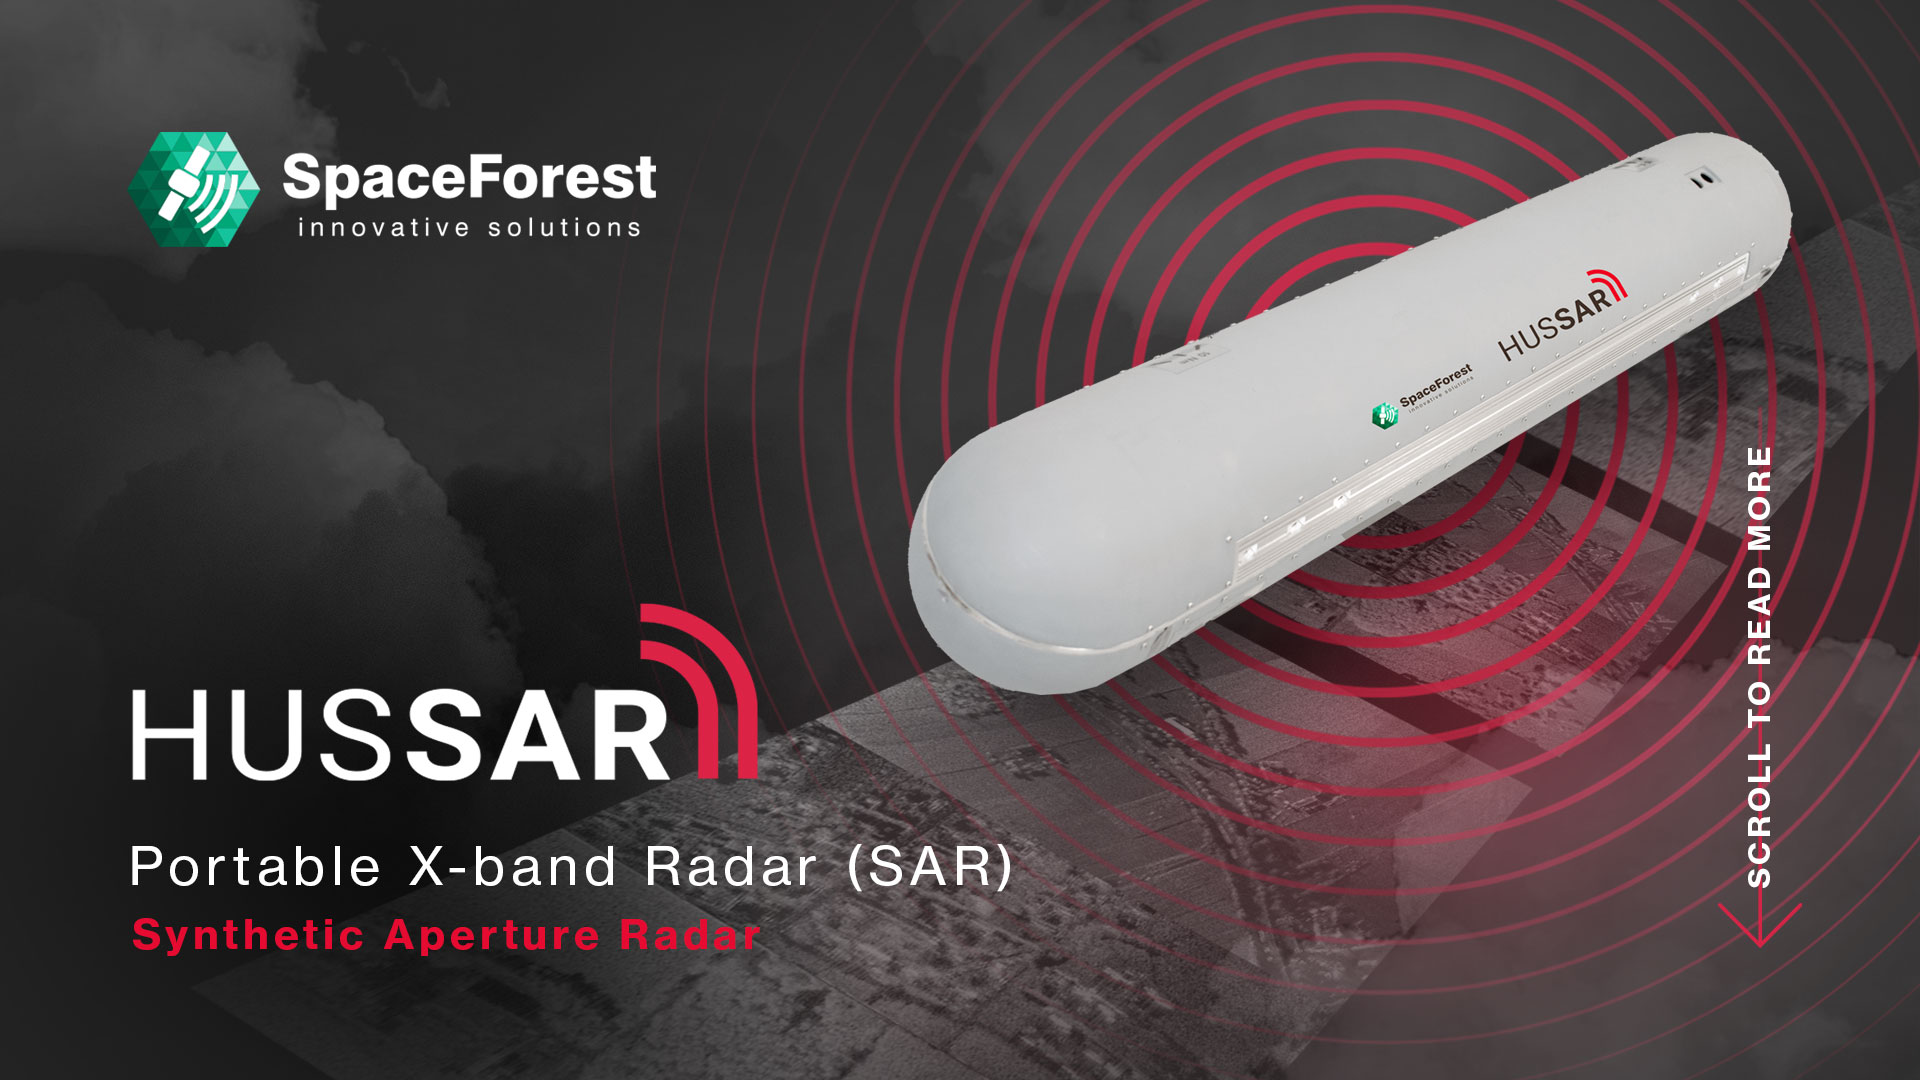 HUSSAR - photo and logo of the portable sar radar by spaceforest